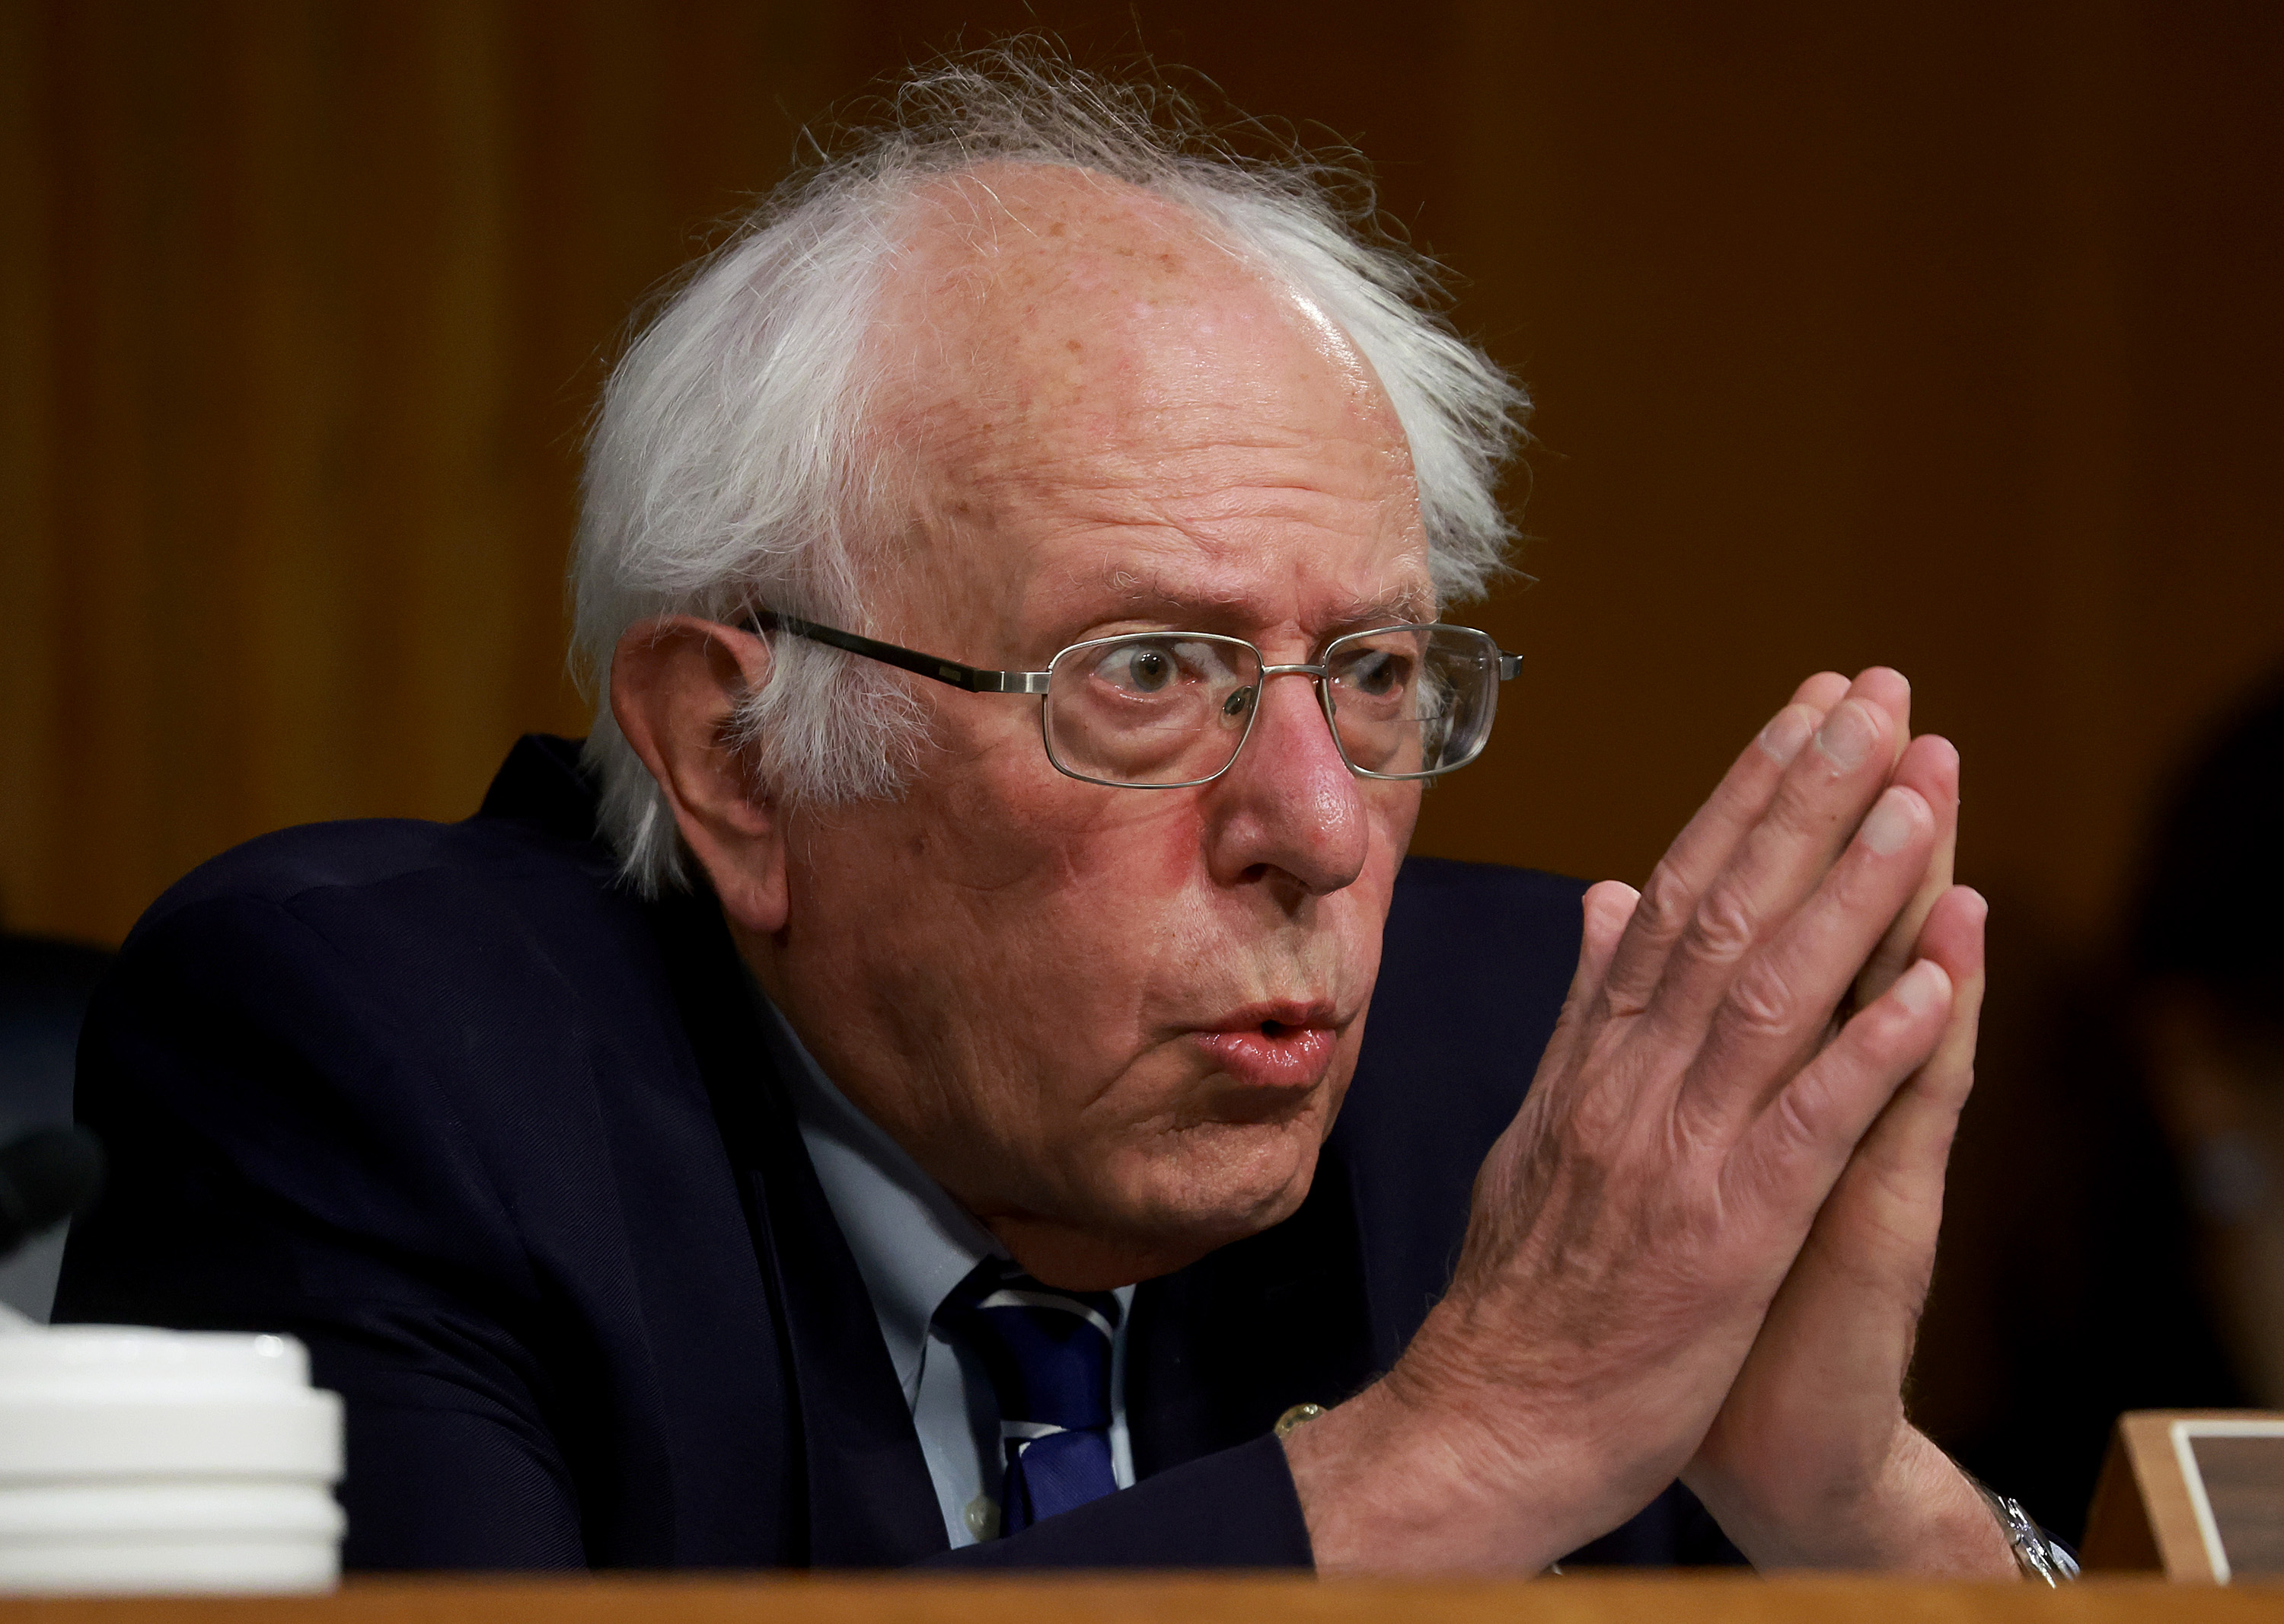 Stimulus Check Update: Bernie Sanders Pushes for Child Tax Credit Extension